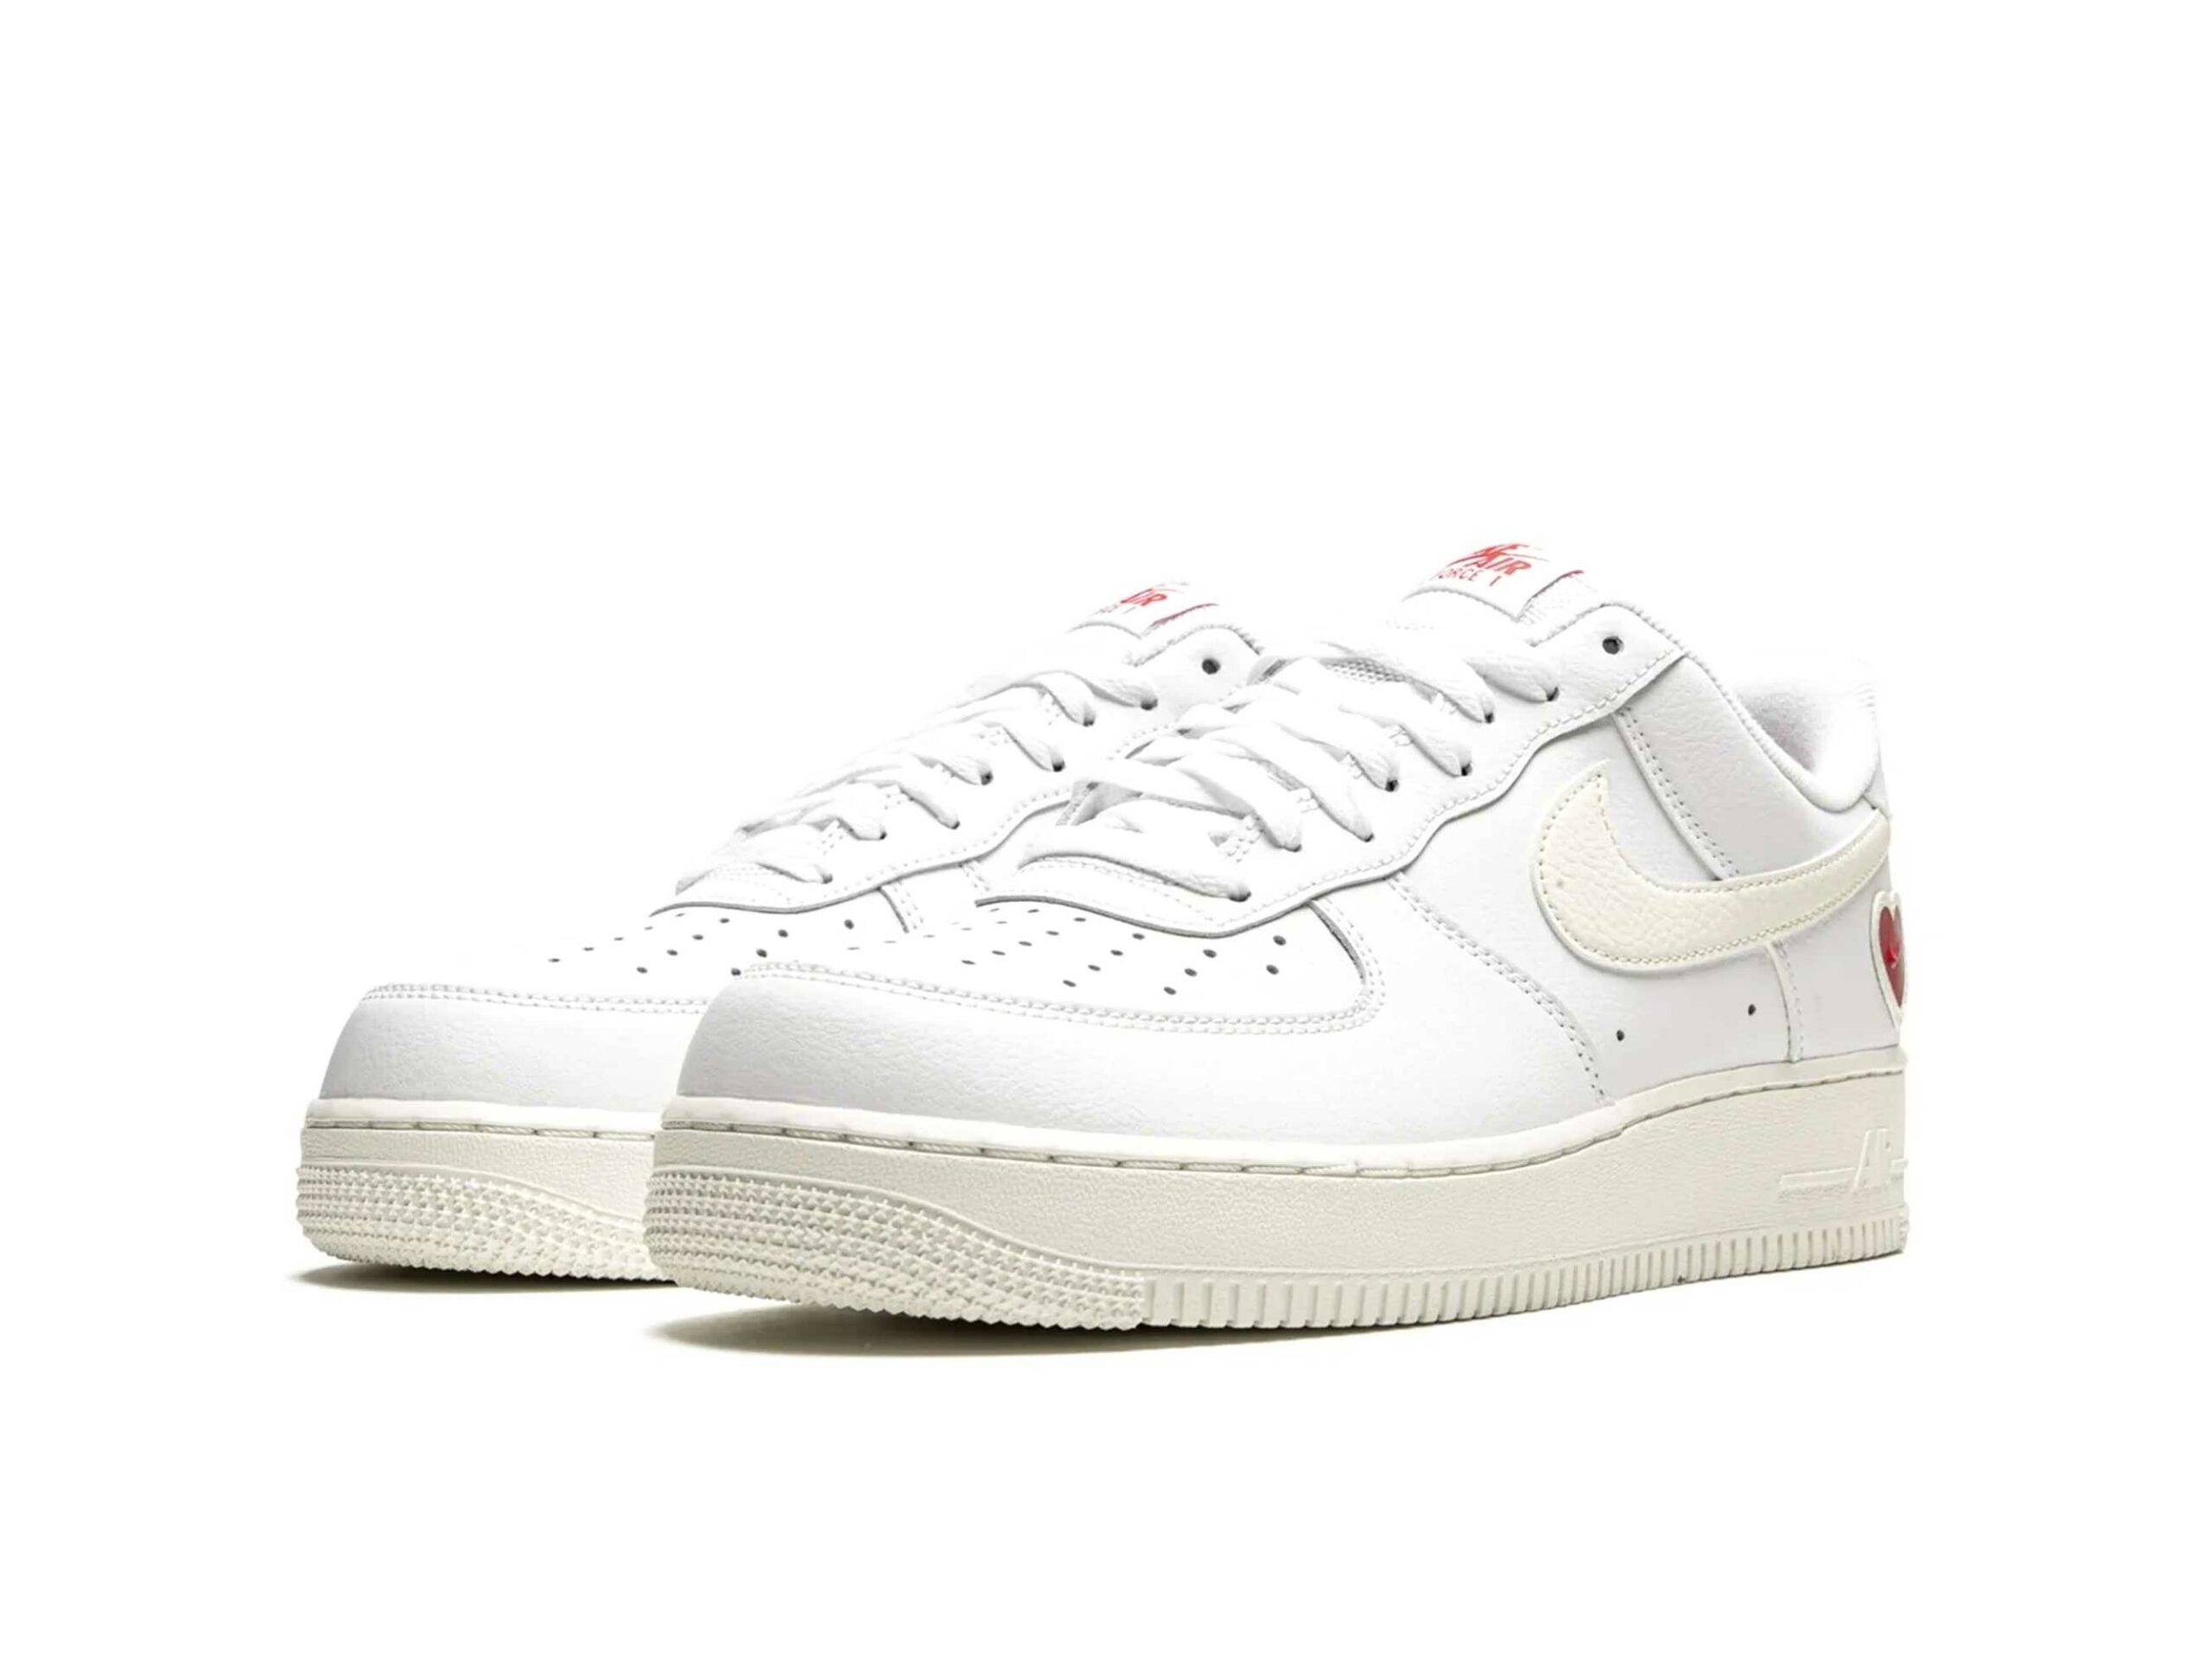 Nike air force low valentine s day. Nike Air Force Valentines Day 2021. Nike Air Force 1 Low Valentines Day 2021. Nike Air Force 1 Low Valentines Day. Nike Air Force 1’07 “Valentines Day” (2021).